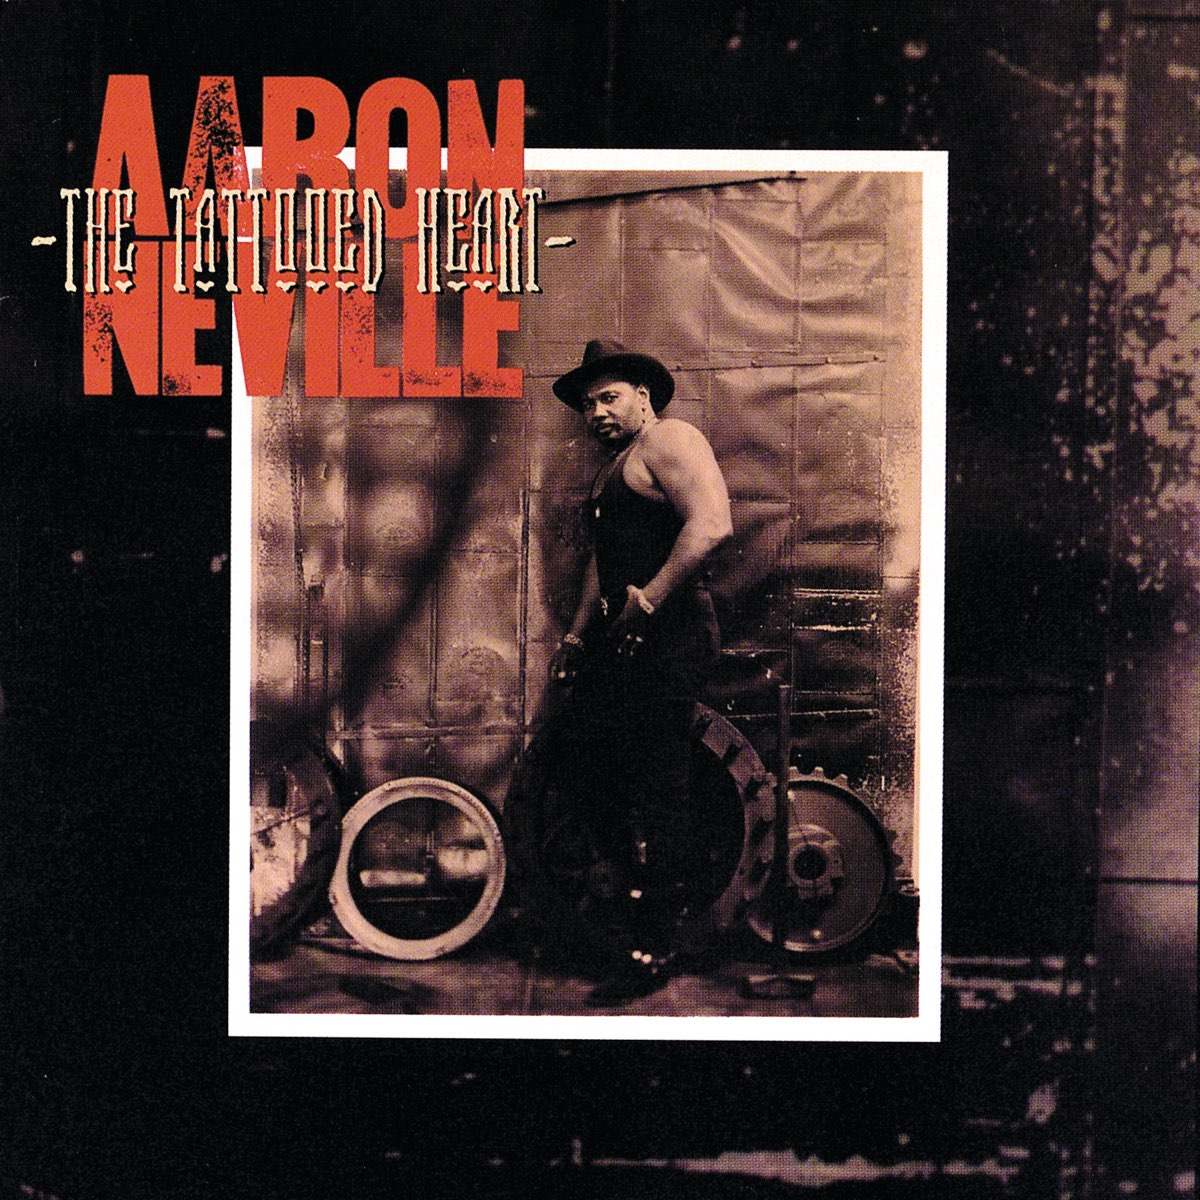 My True Story by Aaron Neville Album DooWop Reviews Ratings Credits  Song list  Rate Your Music